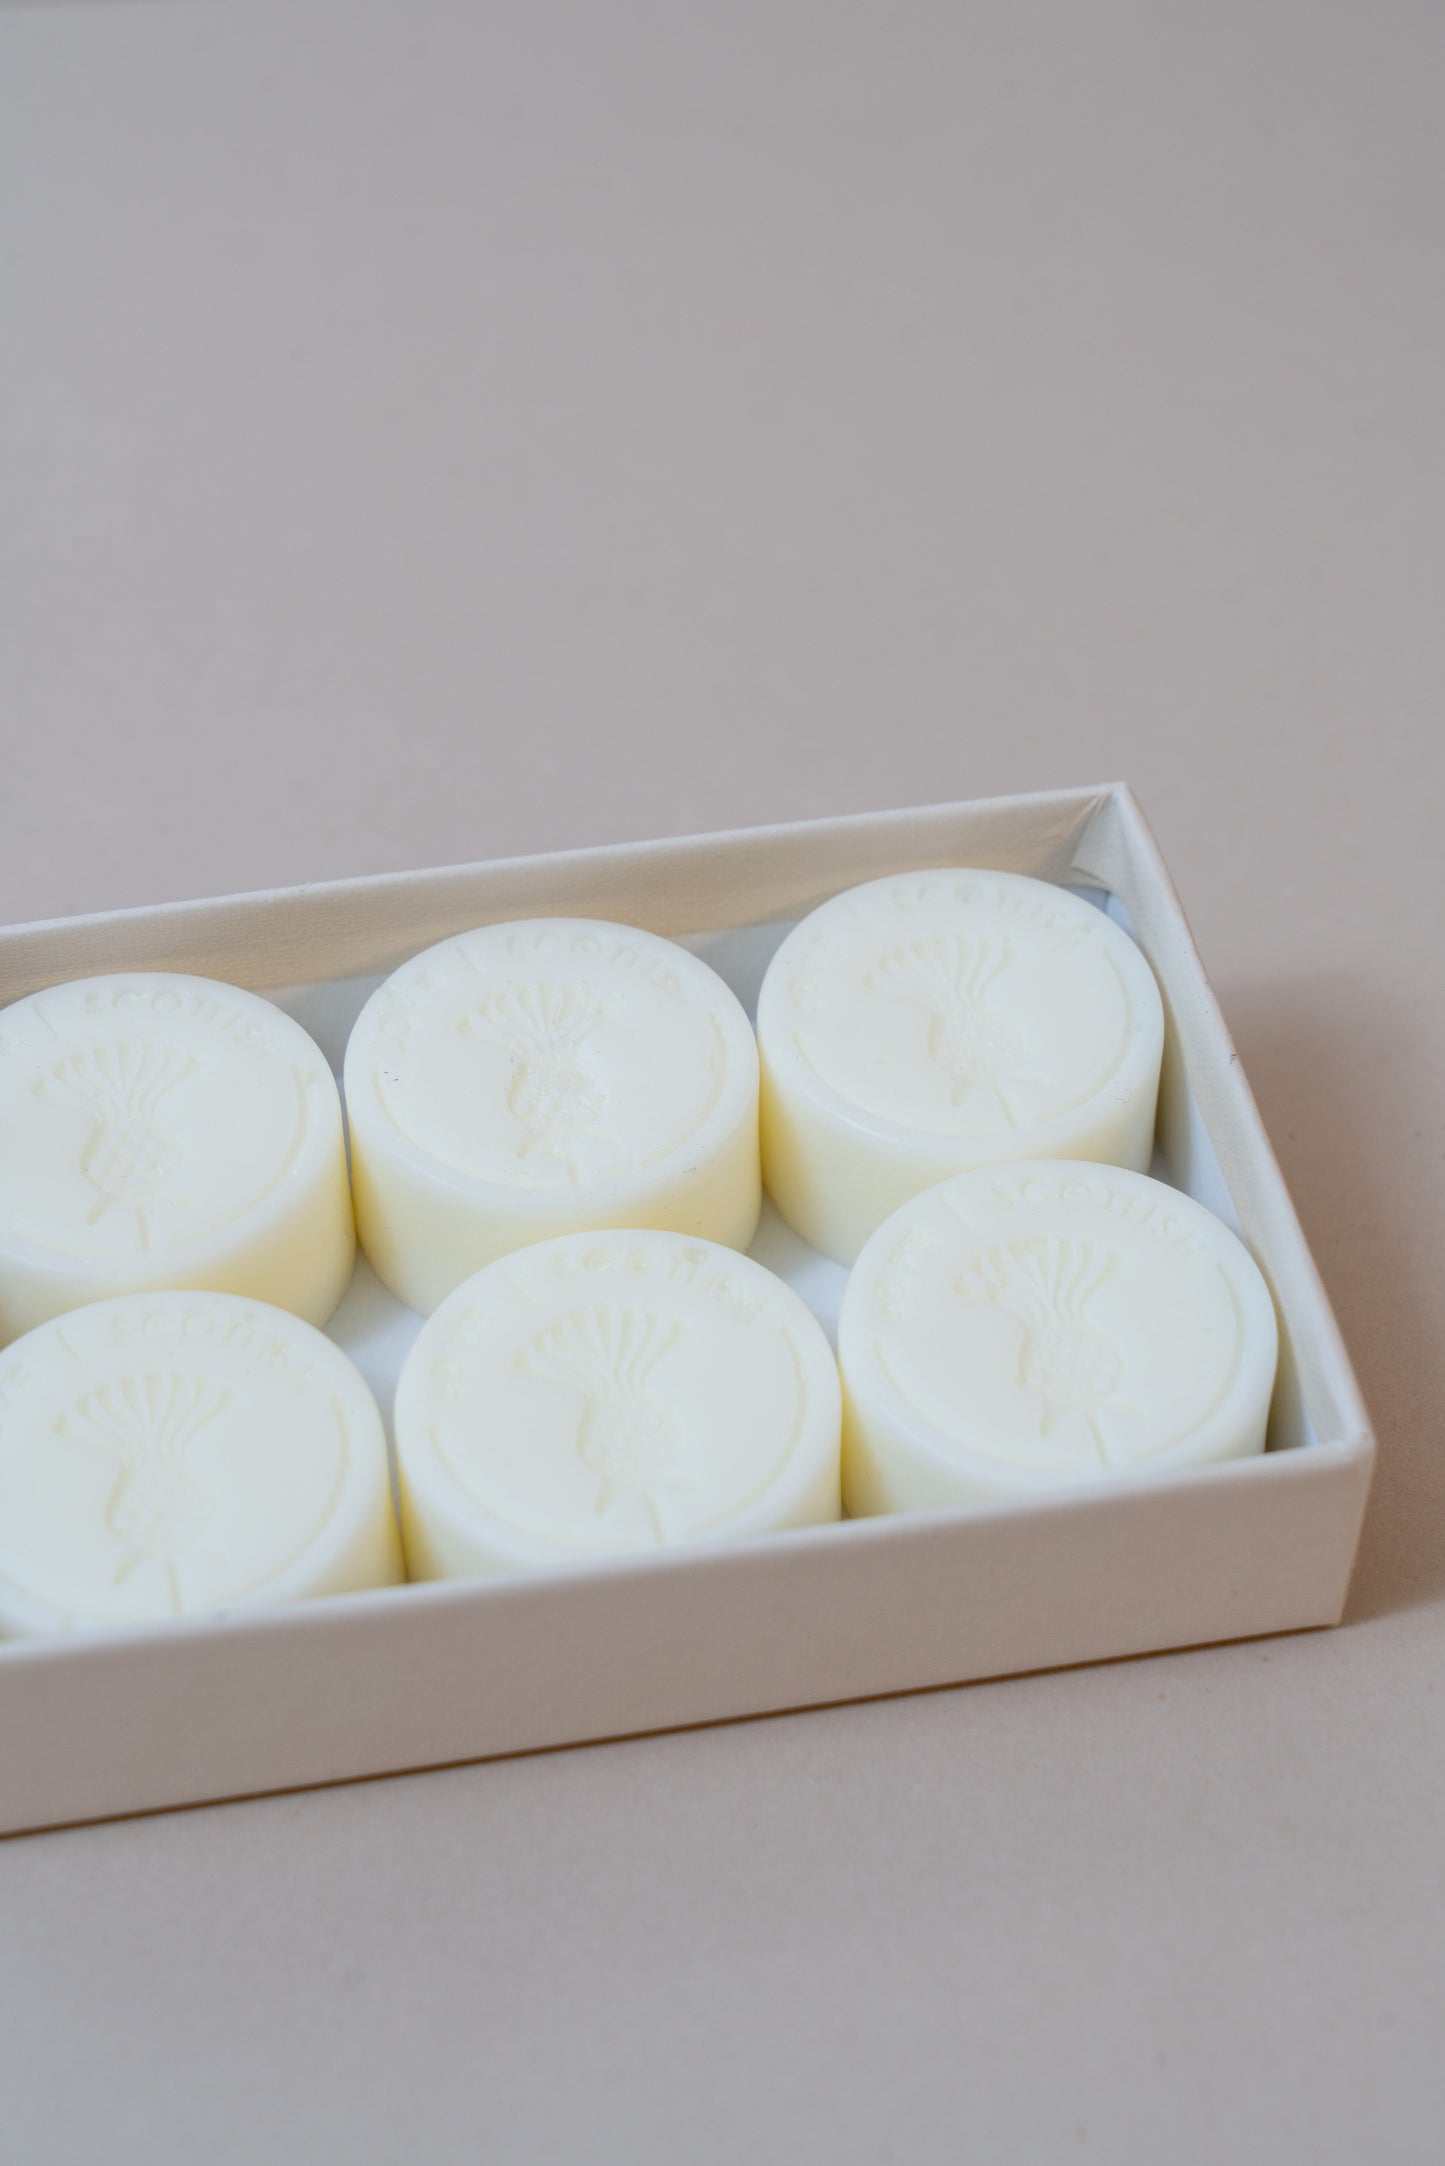 Wax Melts on a White Background